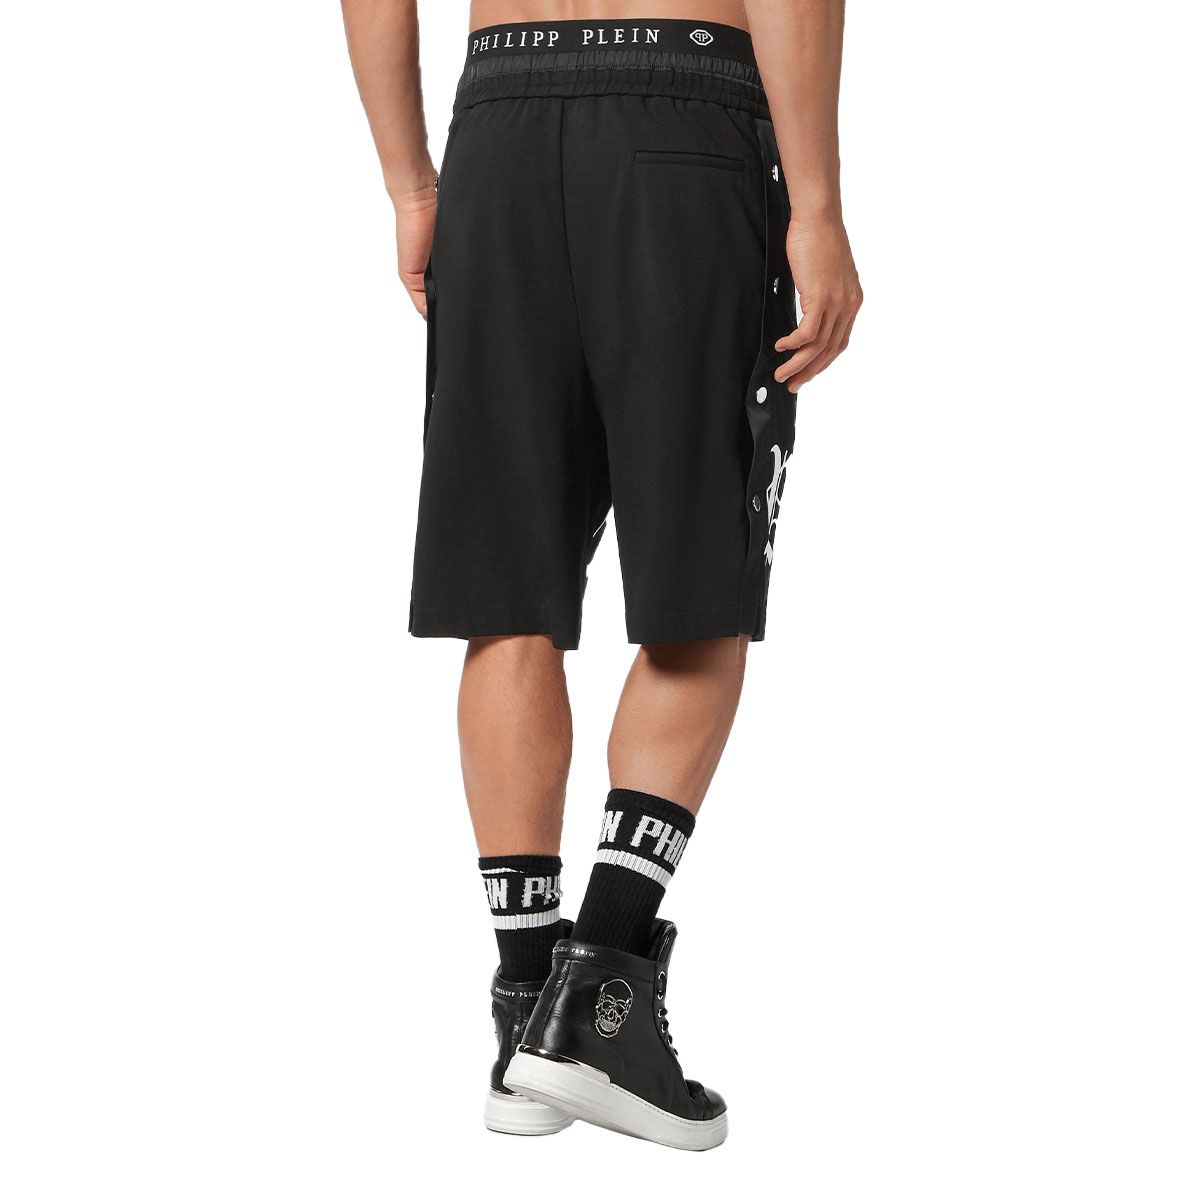 Jersey Gothic Jogging Shorts